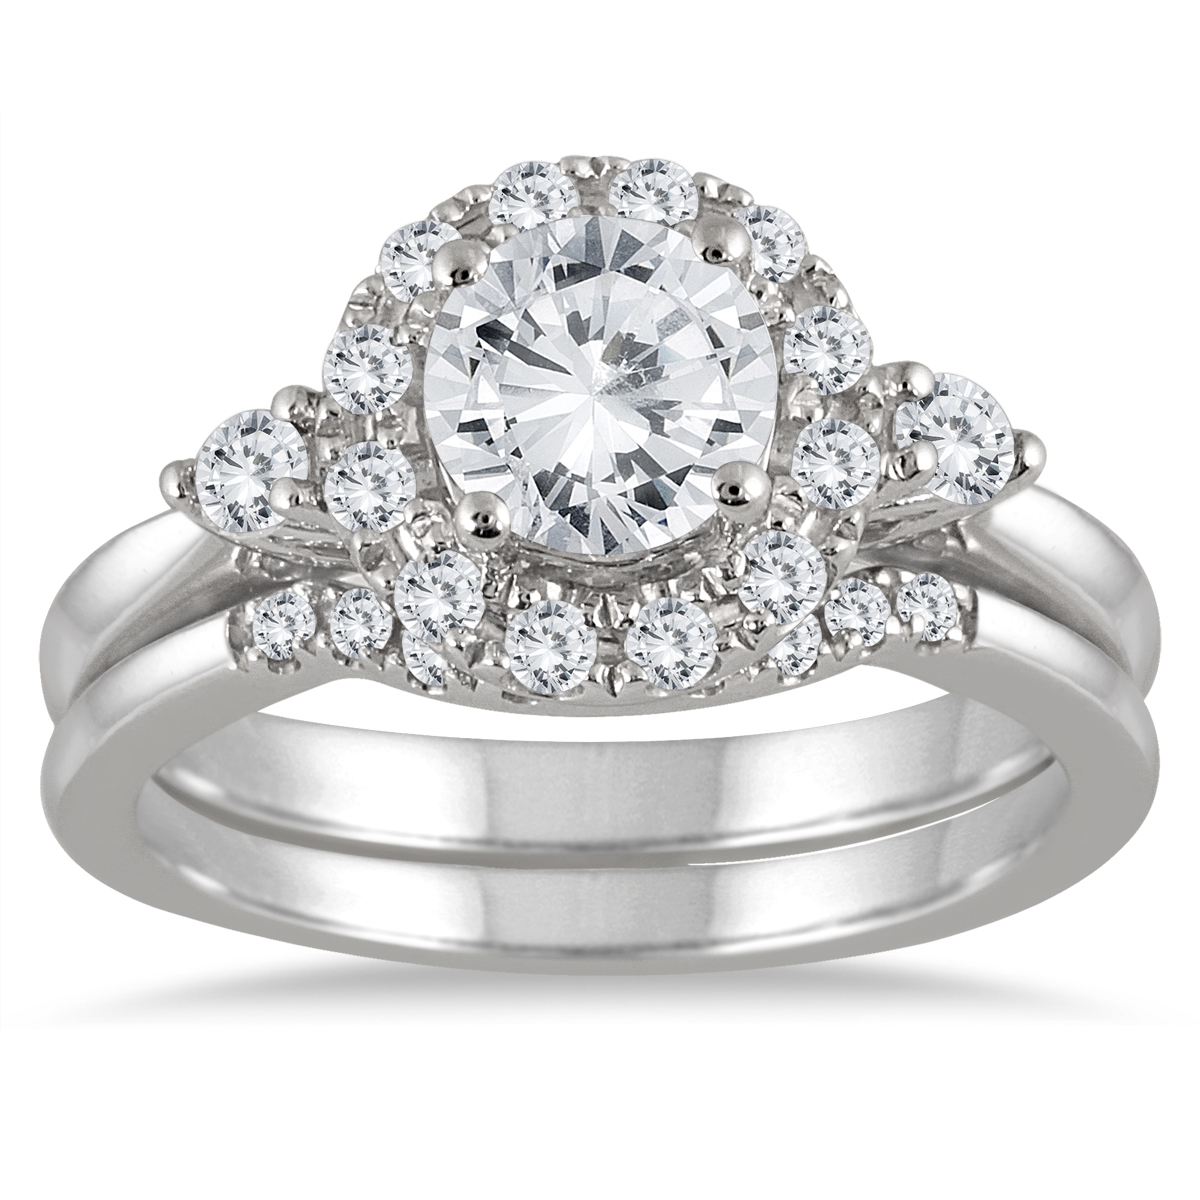 Image of AGS Certified 1 1/2 Carat TW Halo Diamond Halo Bridal Set in 14K White Gold (J-K Color I2-I3 Clarity)